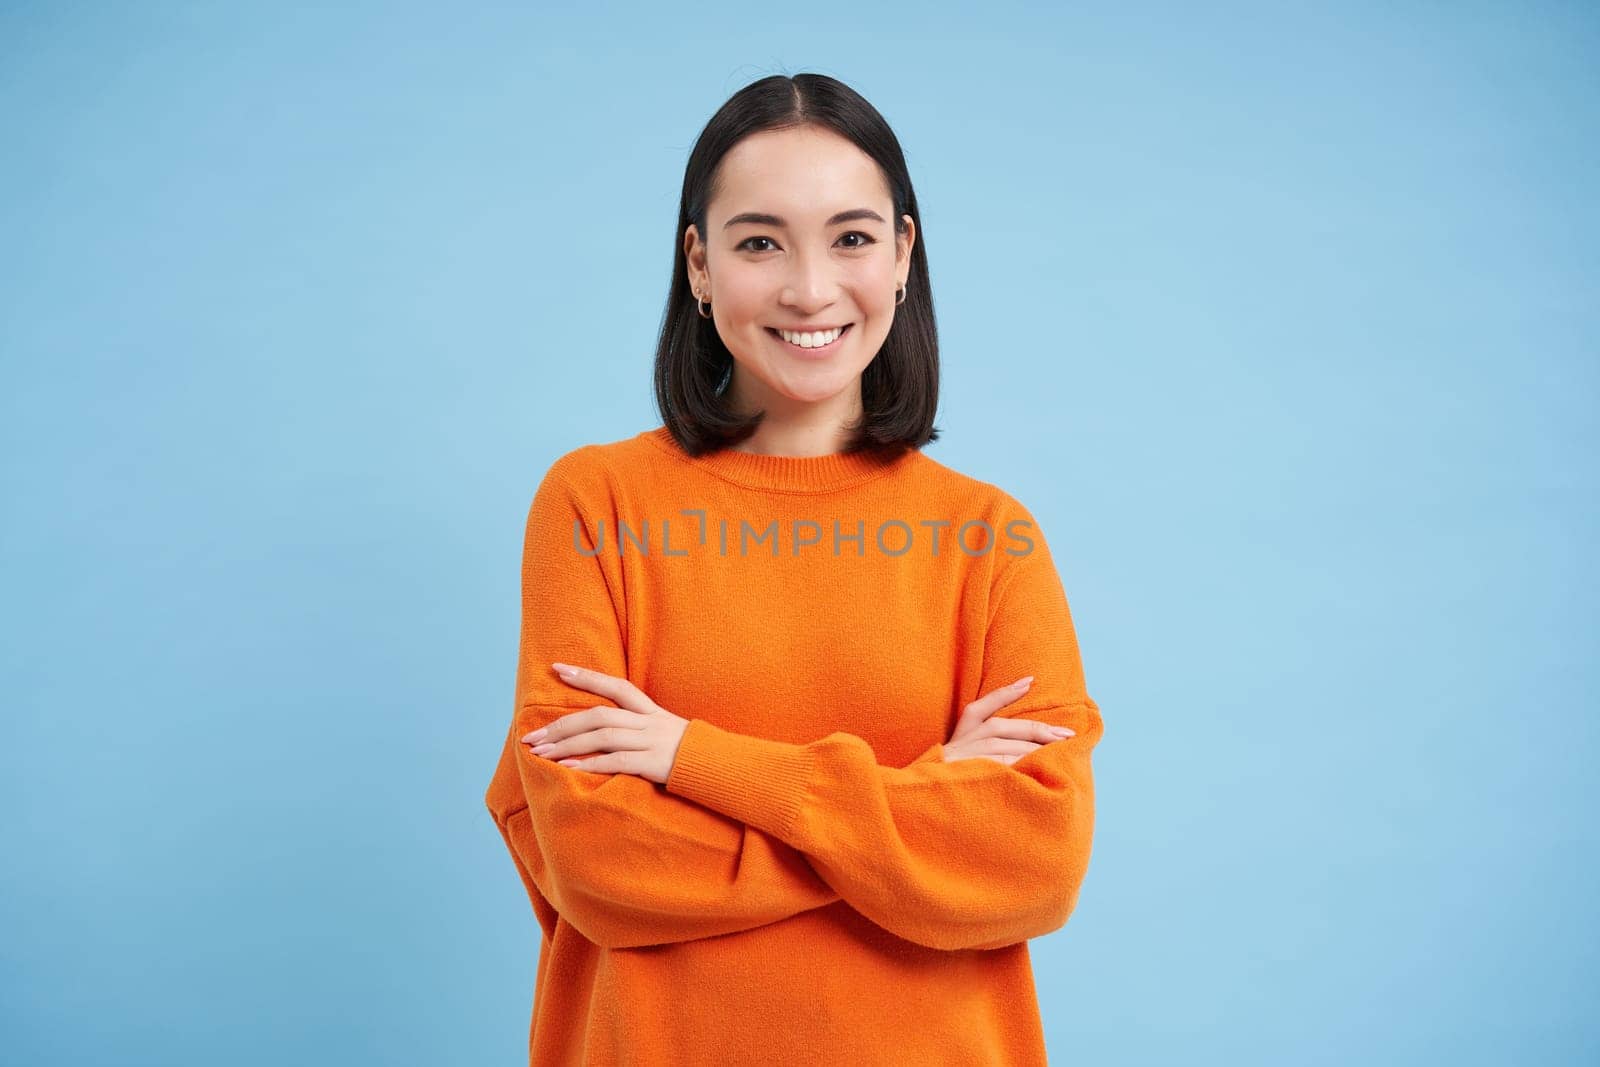 Young asian woman looks with confidence, cross arms on chest and smiles at camera, stands in orange sweatshirt, blue background.